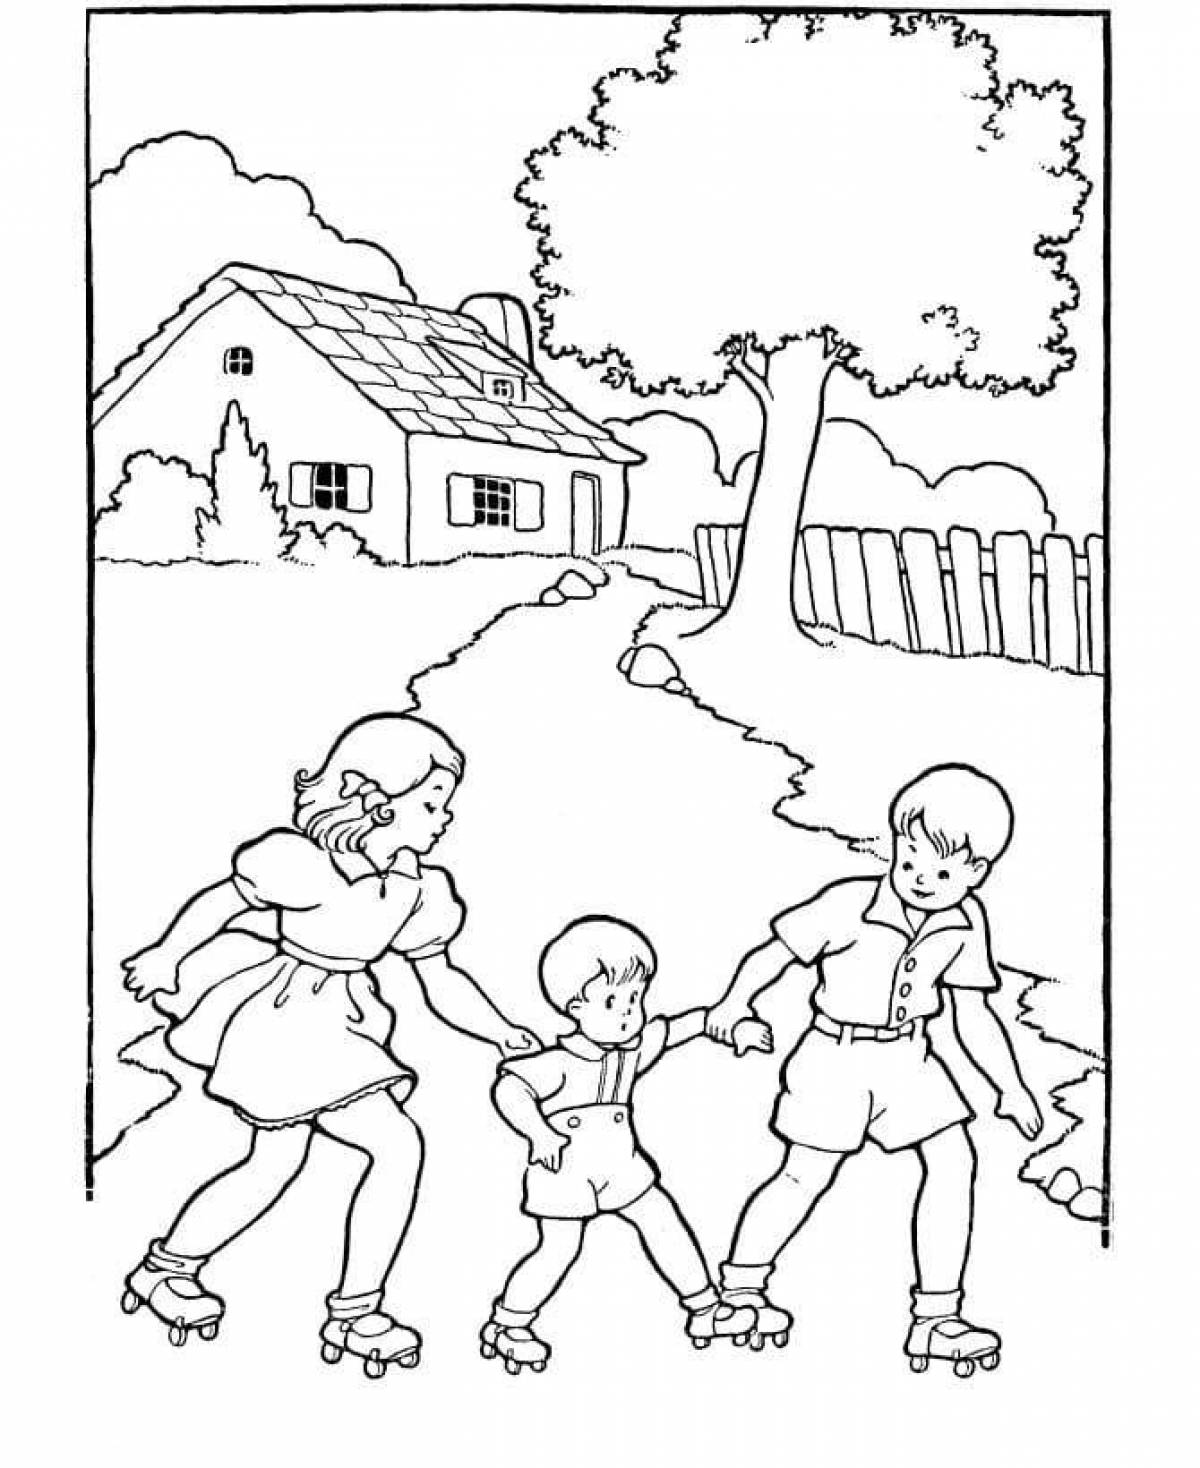 Delightful childhood coloring book